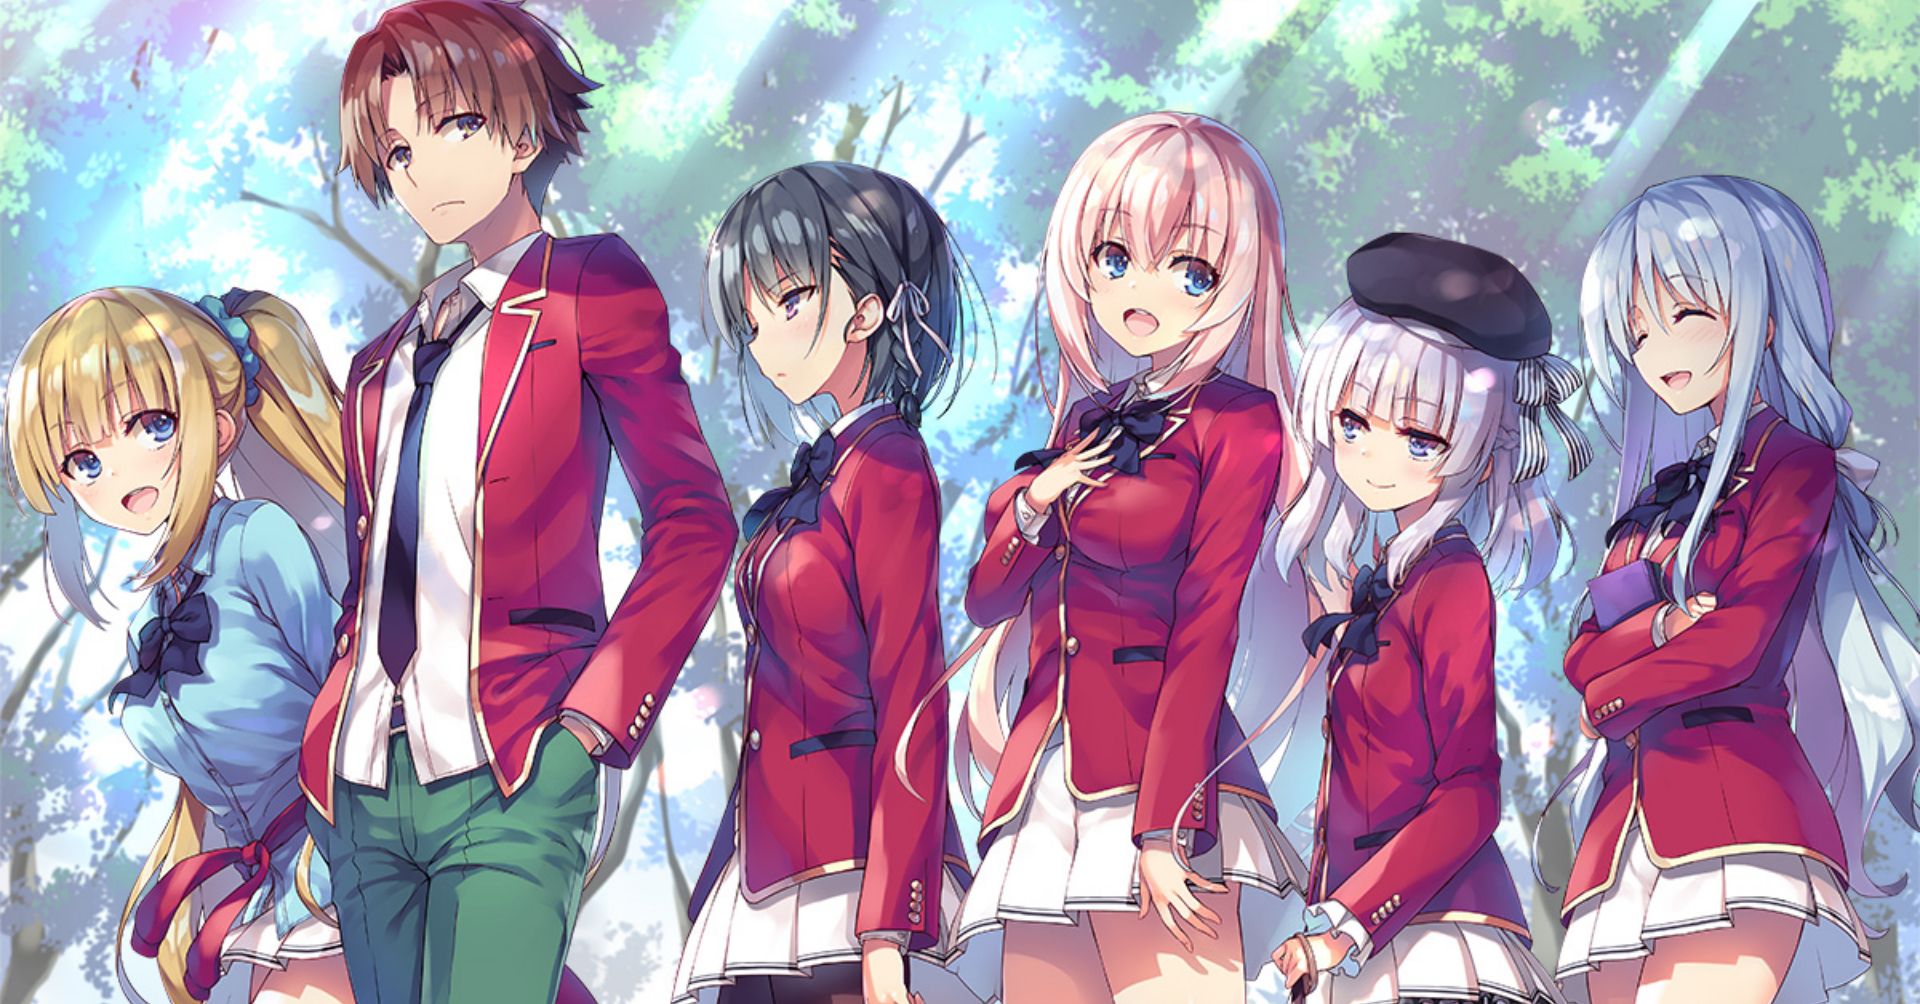 Anime Trending on X: Classroom of the Elite II - Episode 1 (Discussion)  After five years, the anime makes a spectacular return with Season 2  premiering at Anime Expo 2022. We're trying